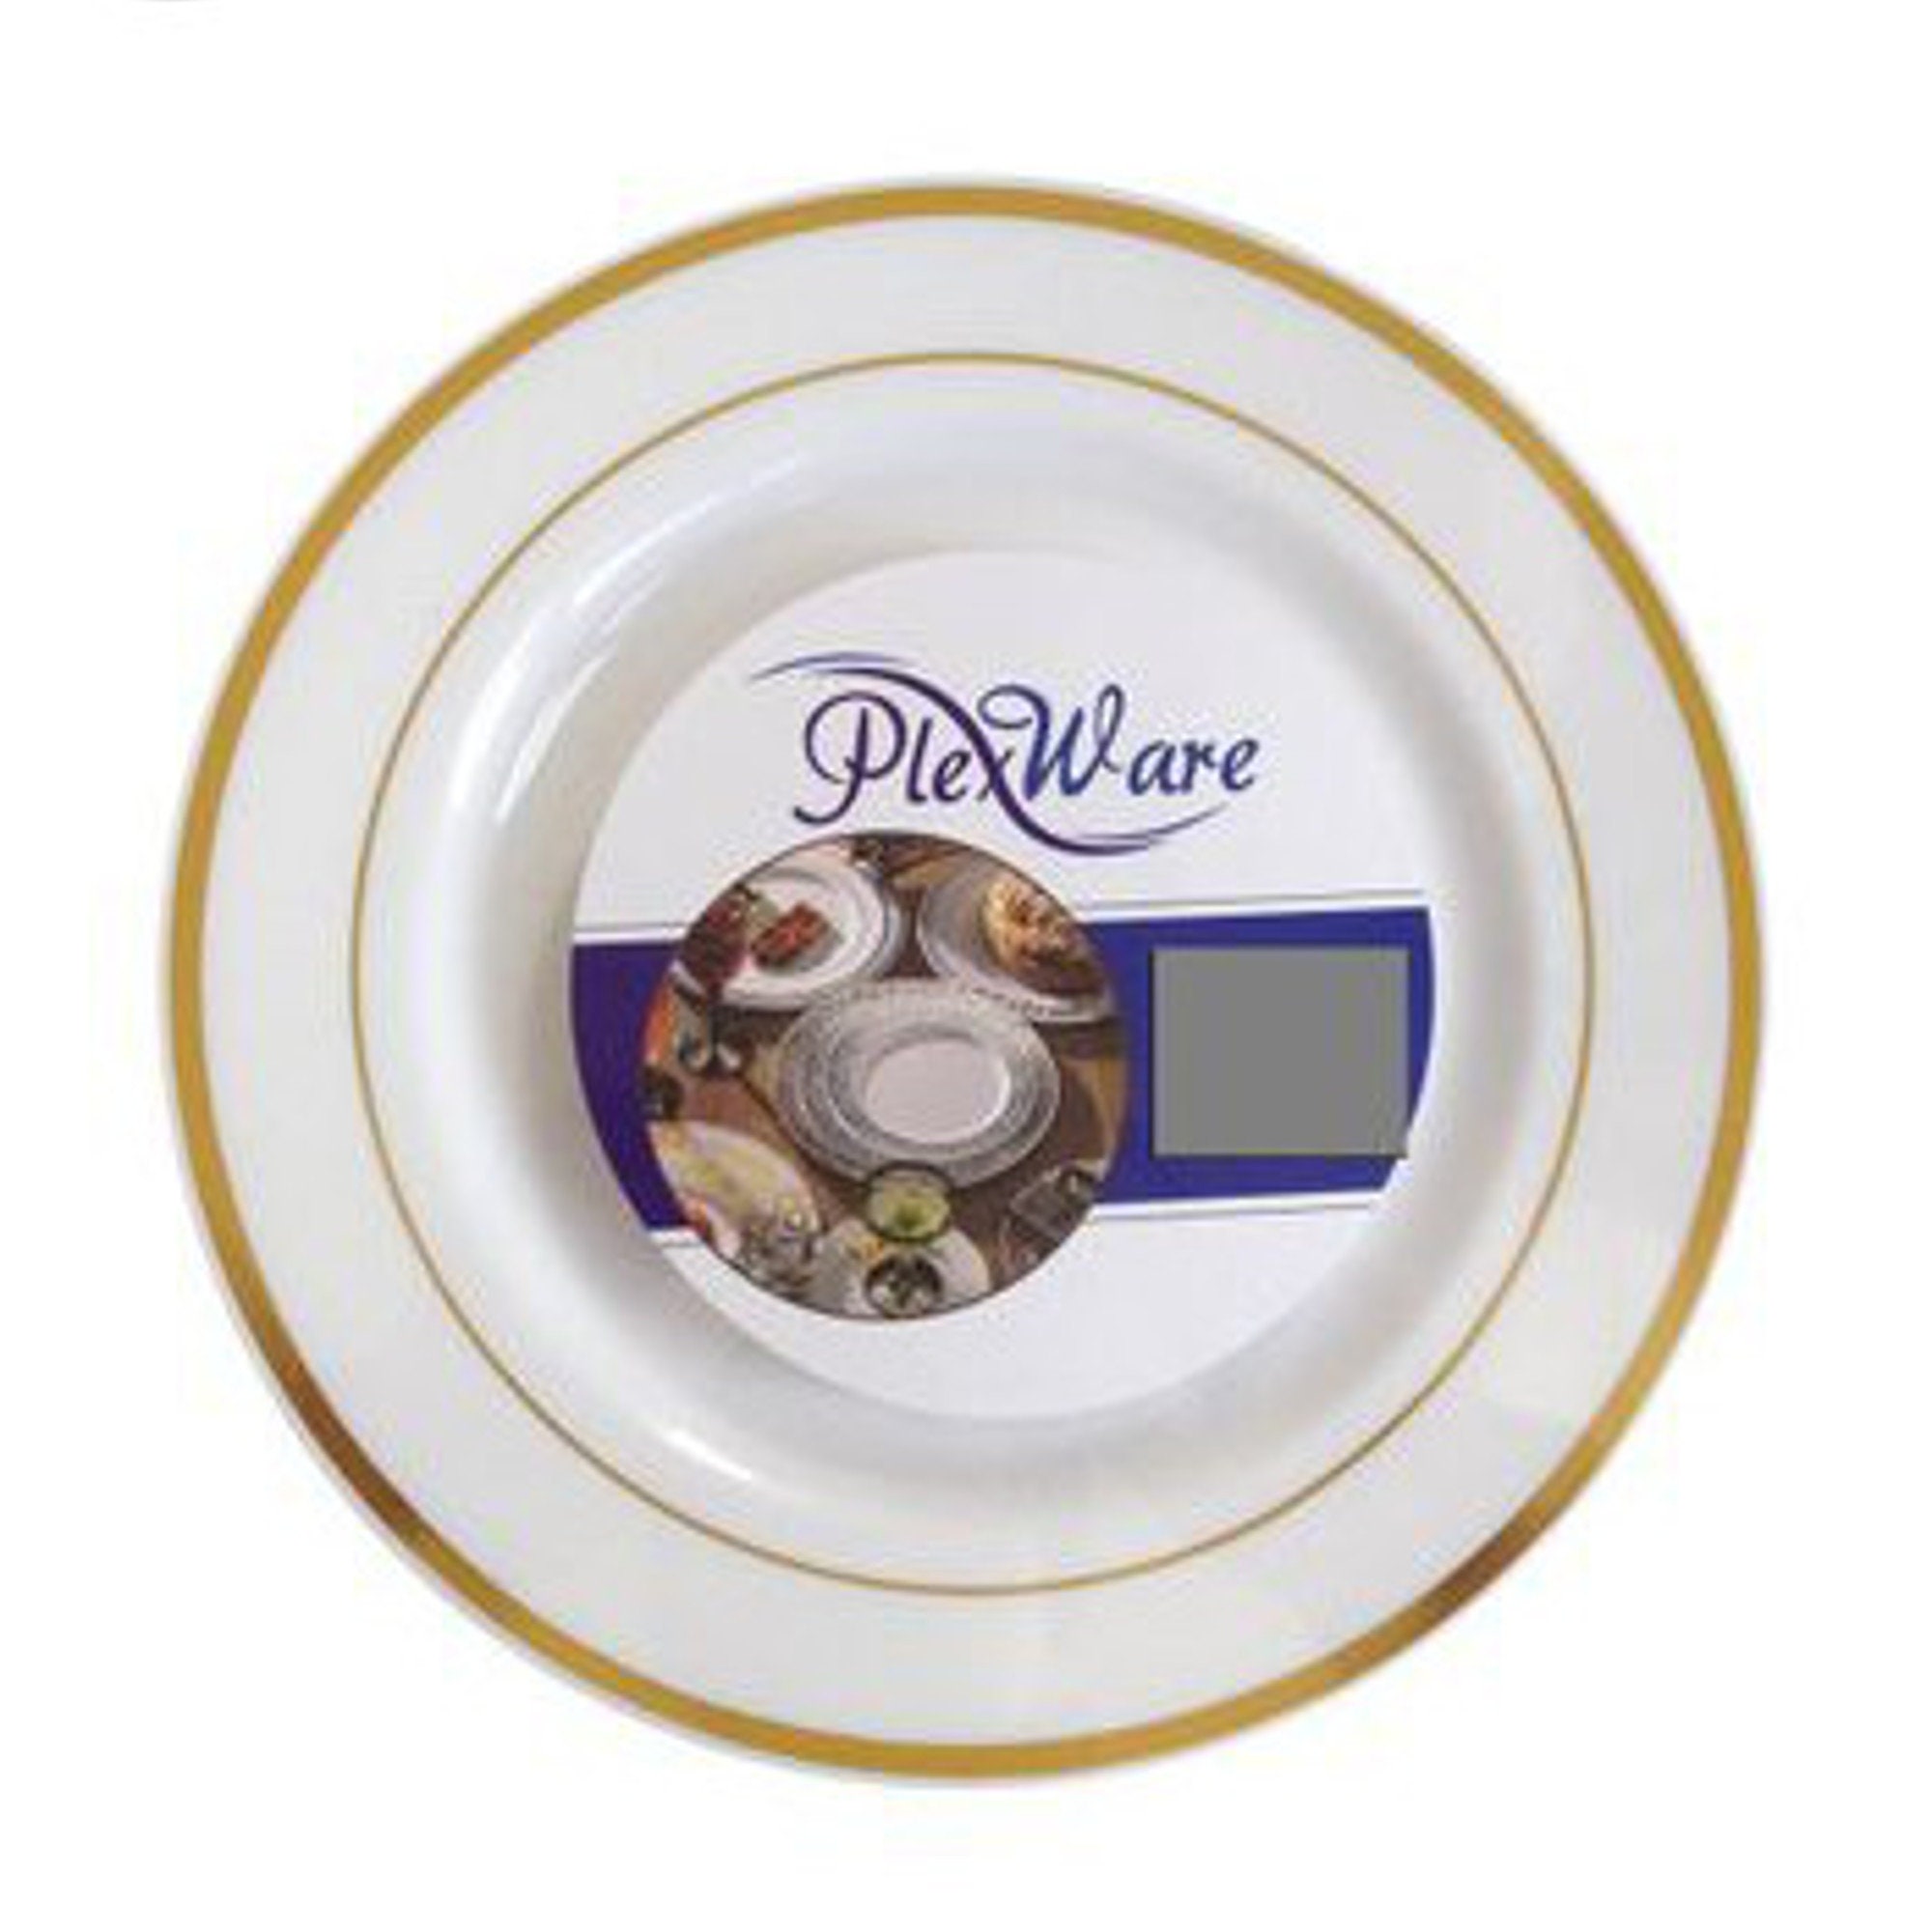 Plexware Collection 10.25 White W/ Gold Band Dinner - Etsy